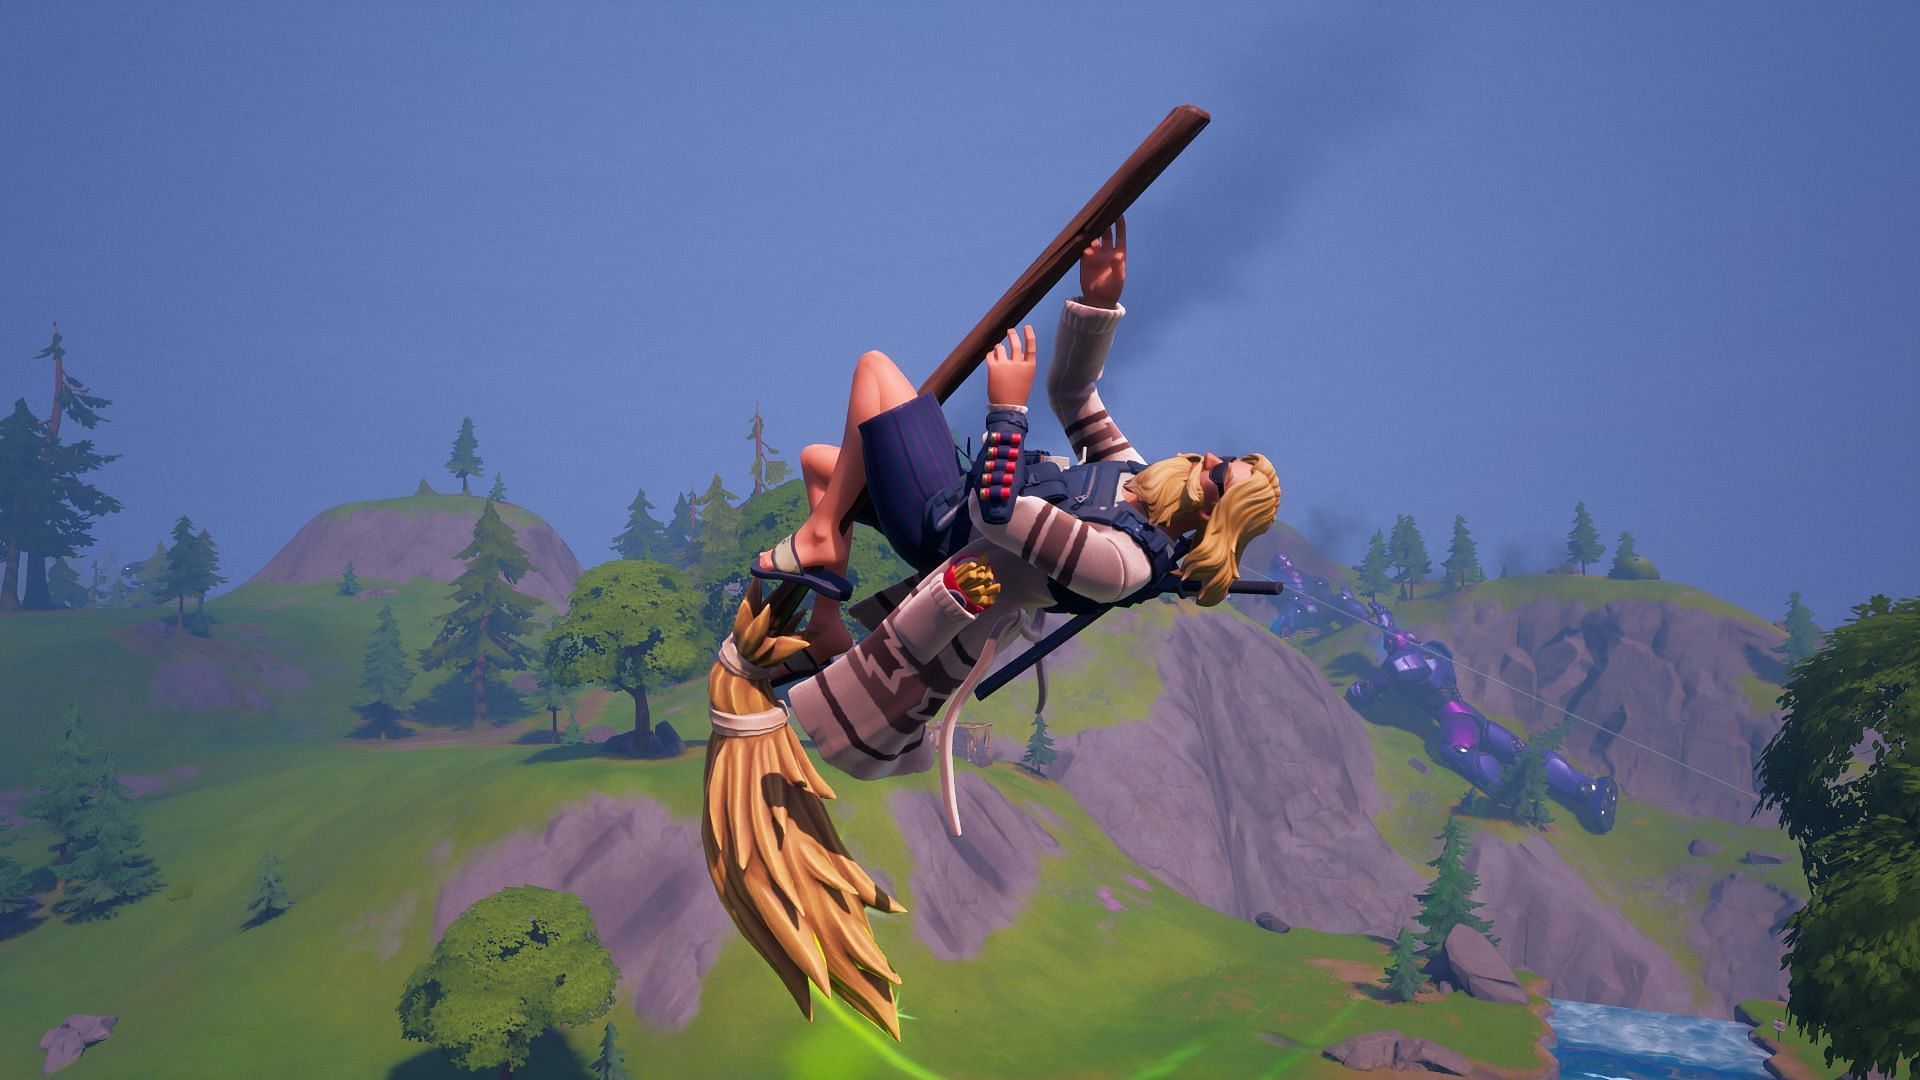 The Witch Broom is a popular Mythic item that comes out during Halloween events (Image via Epic Games)